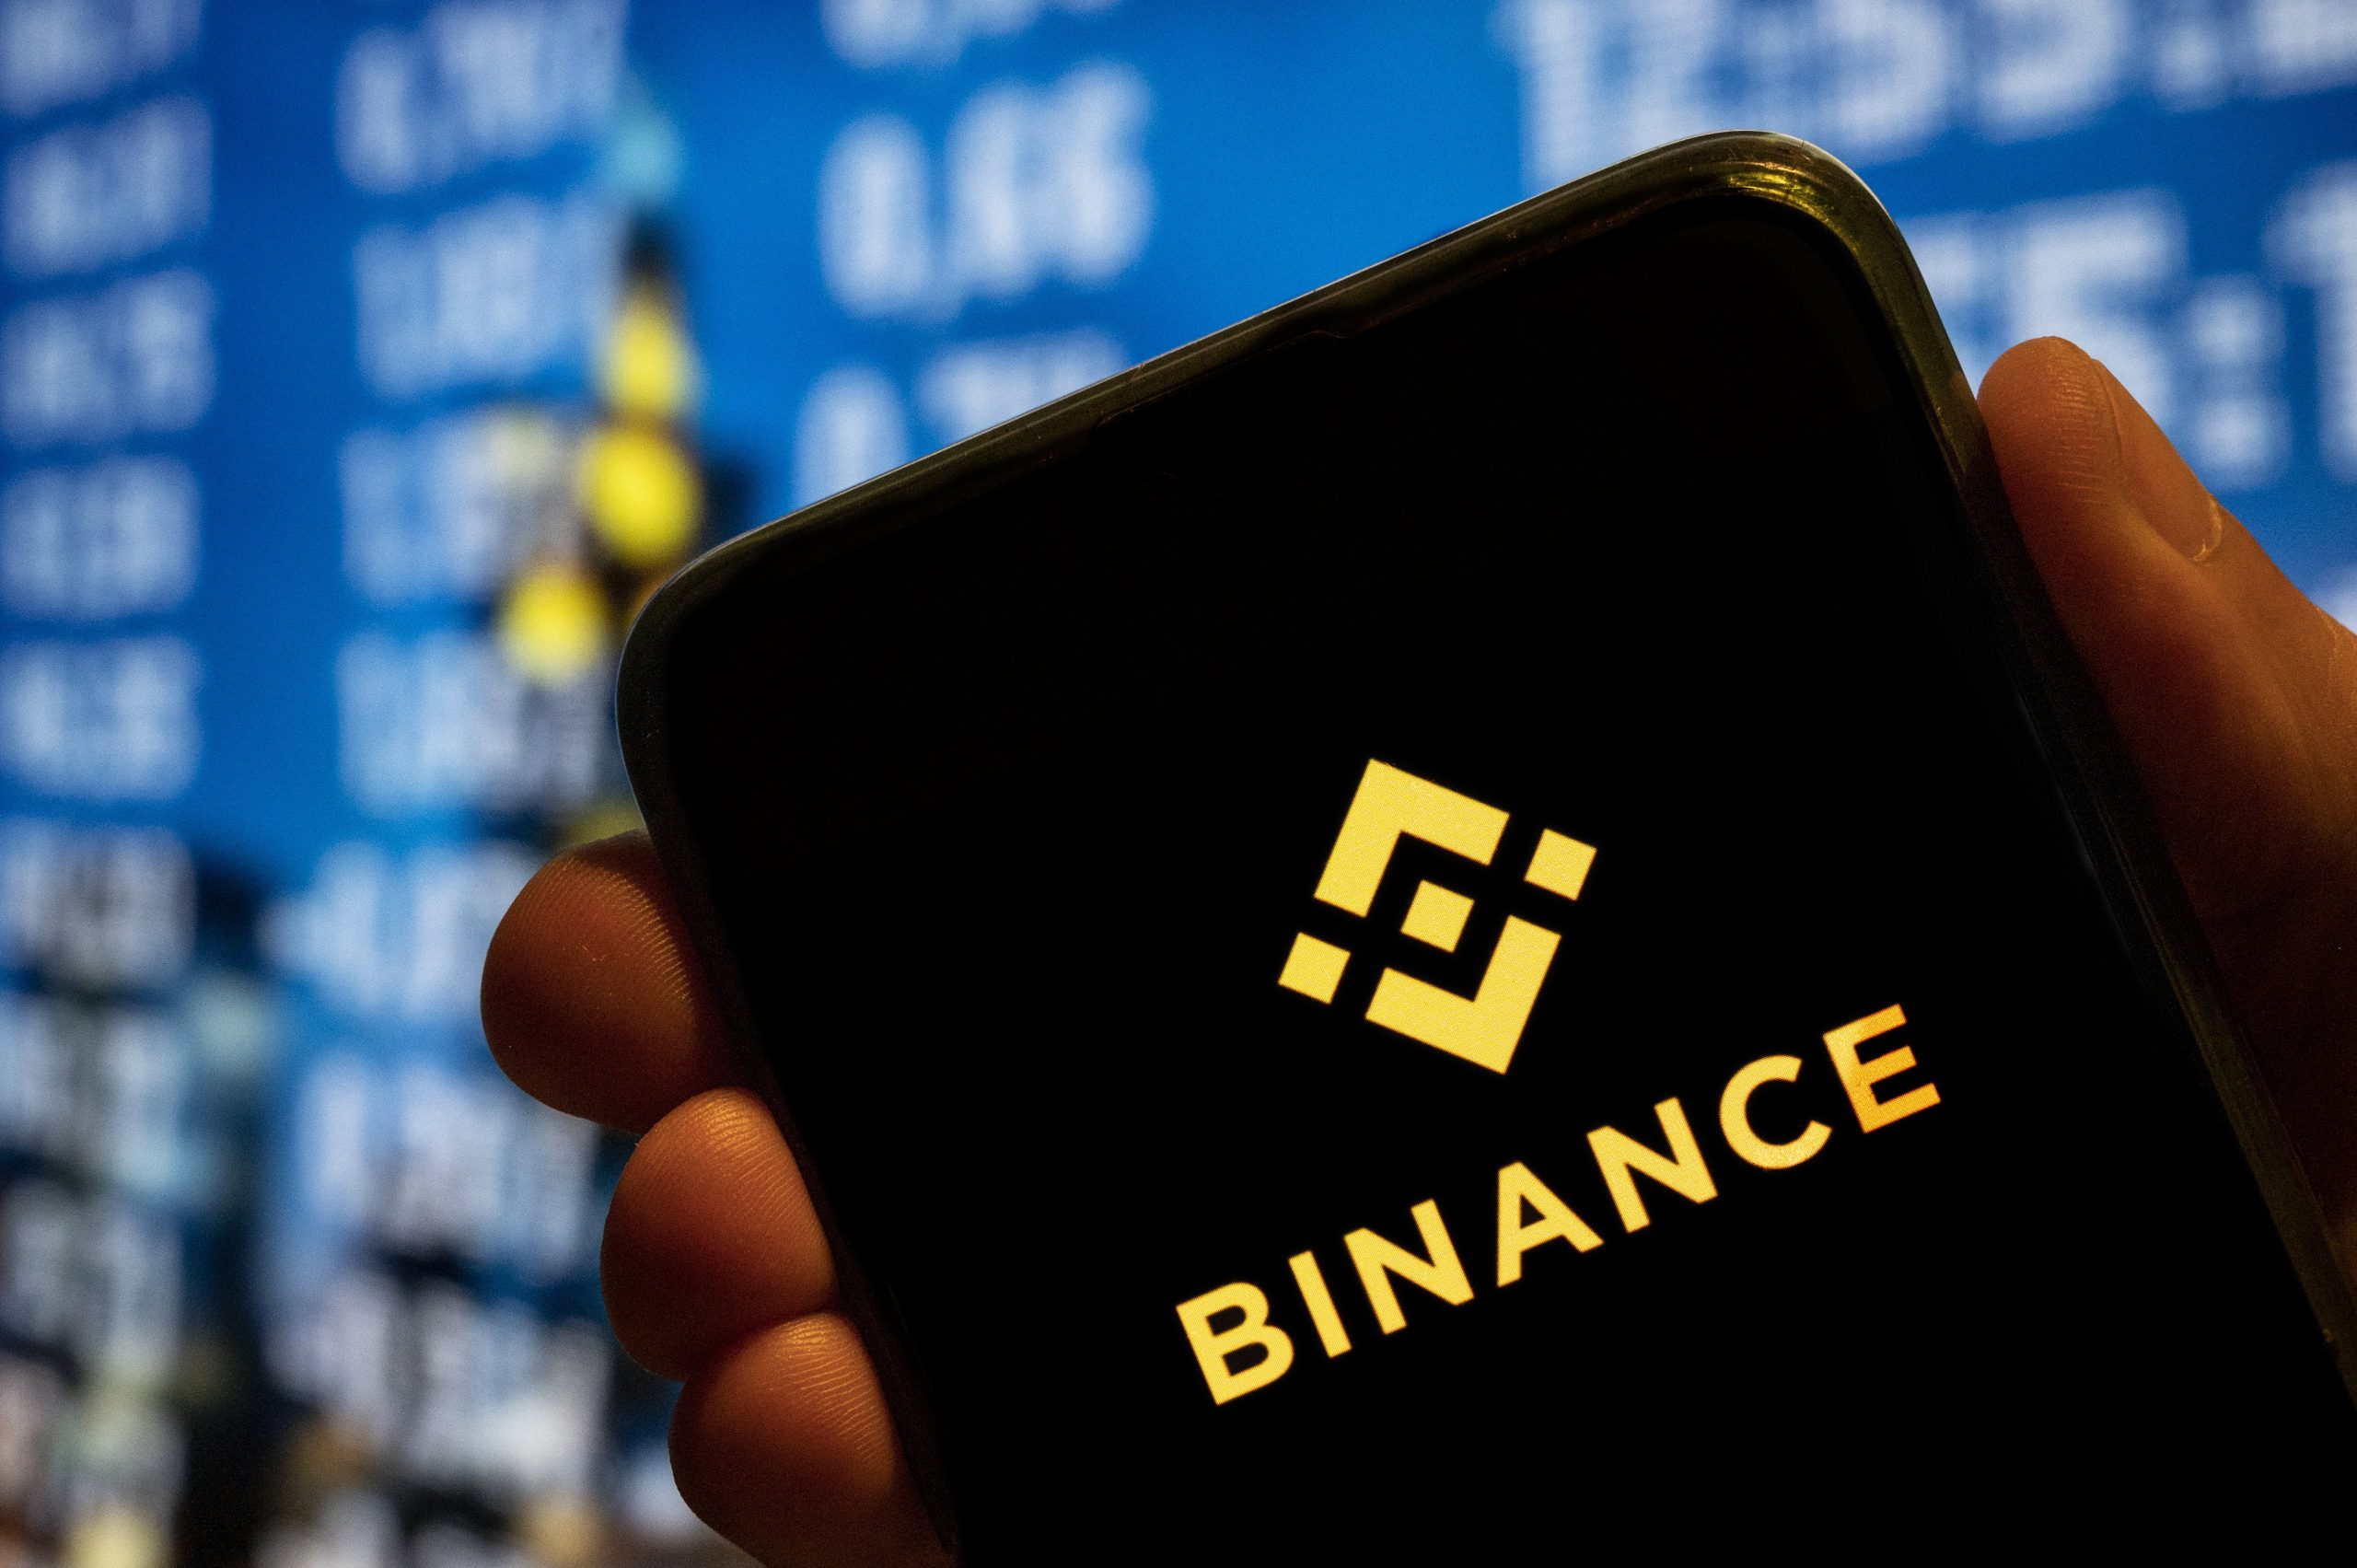 Alert from Binance warns users they’re buying a fugitive’s crypto